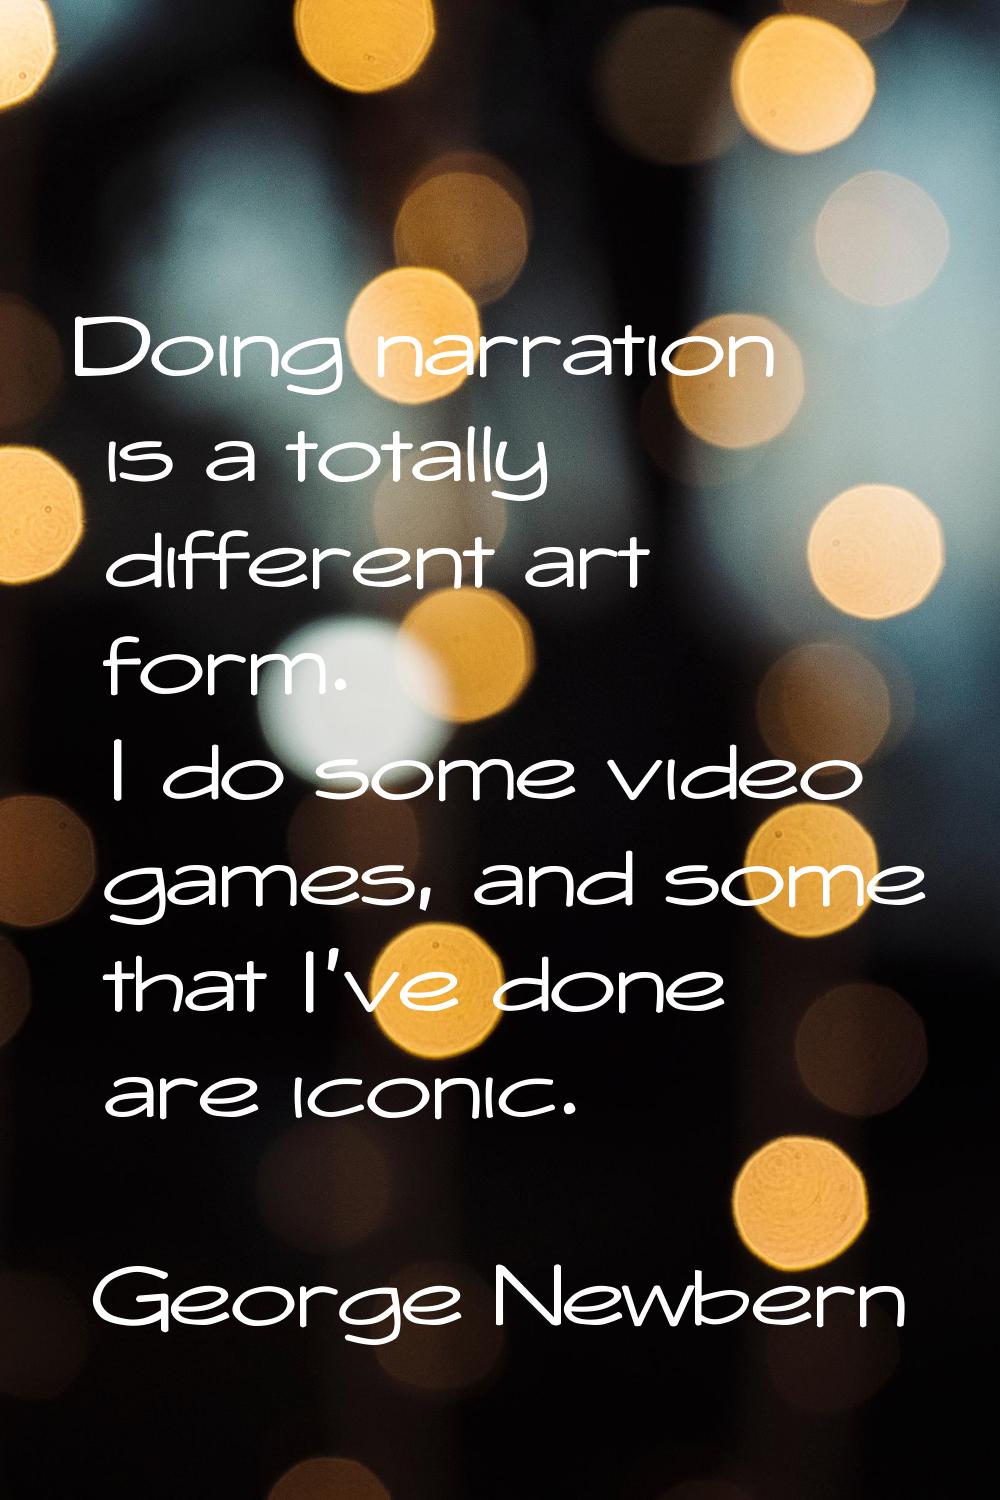 Doing narration is a totally different art form. I do some video games, and some that I've done are